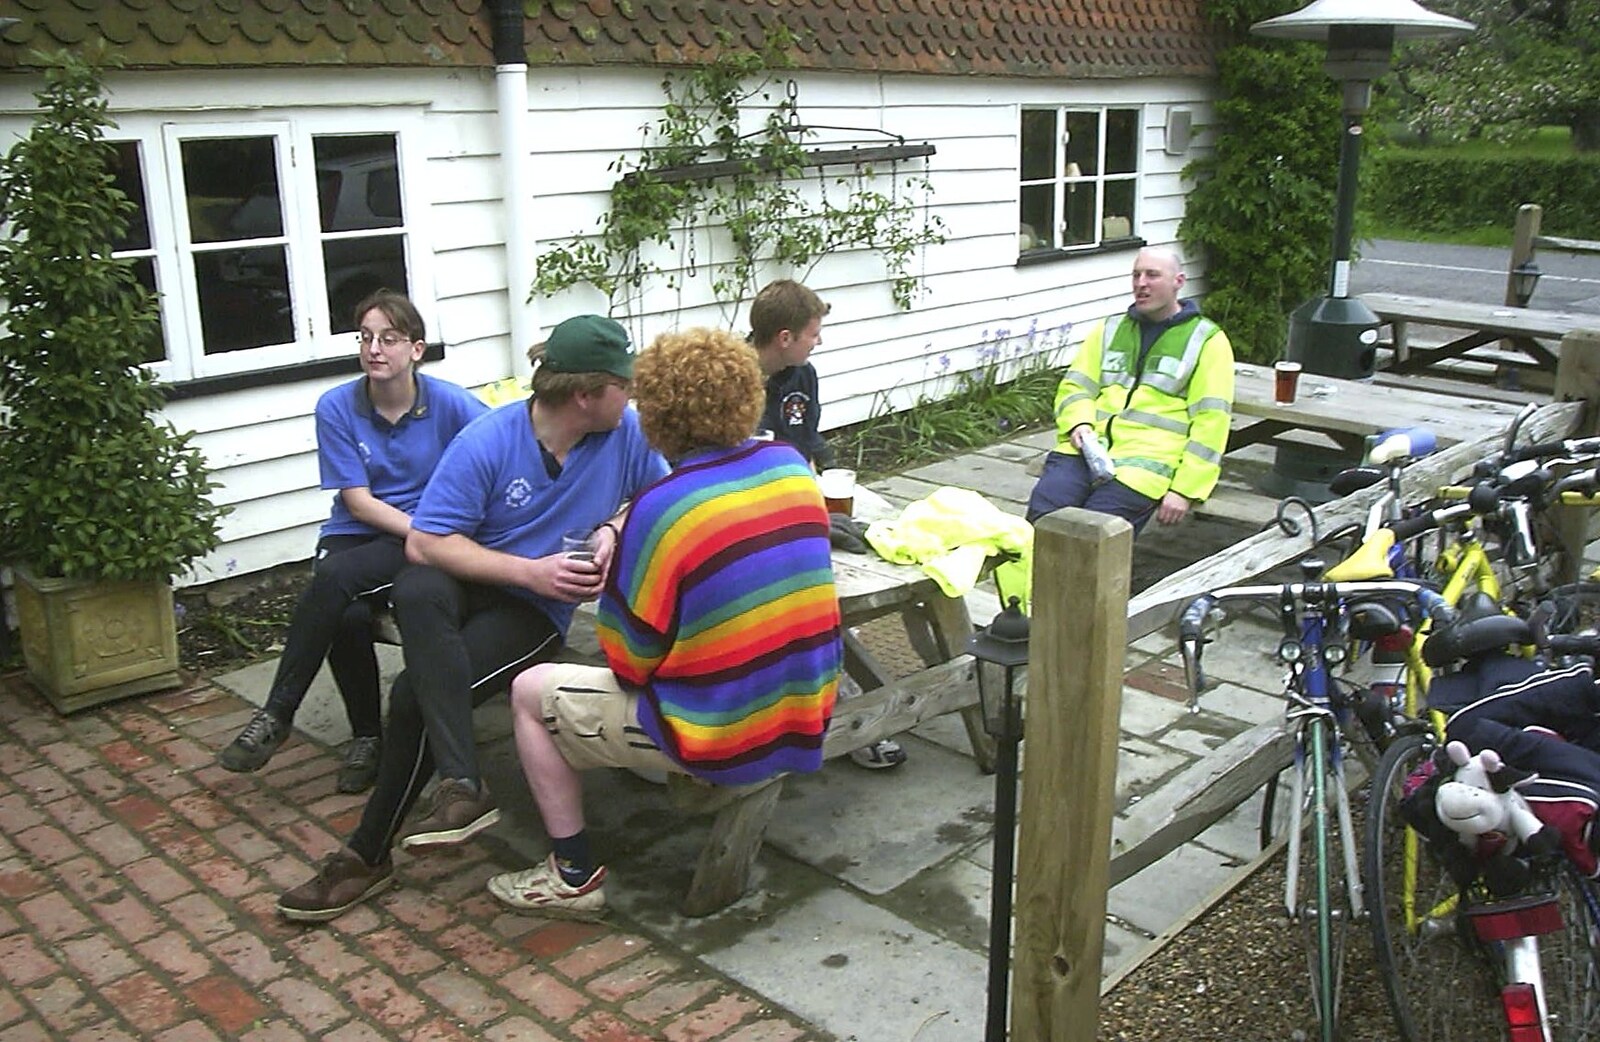 The BSCC Annual Bike Ride, Lenham, Kent - 8th May 2004: Back at the Smarden Bell, which is now open